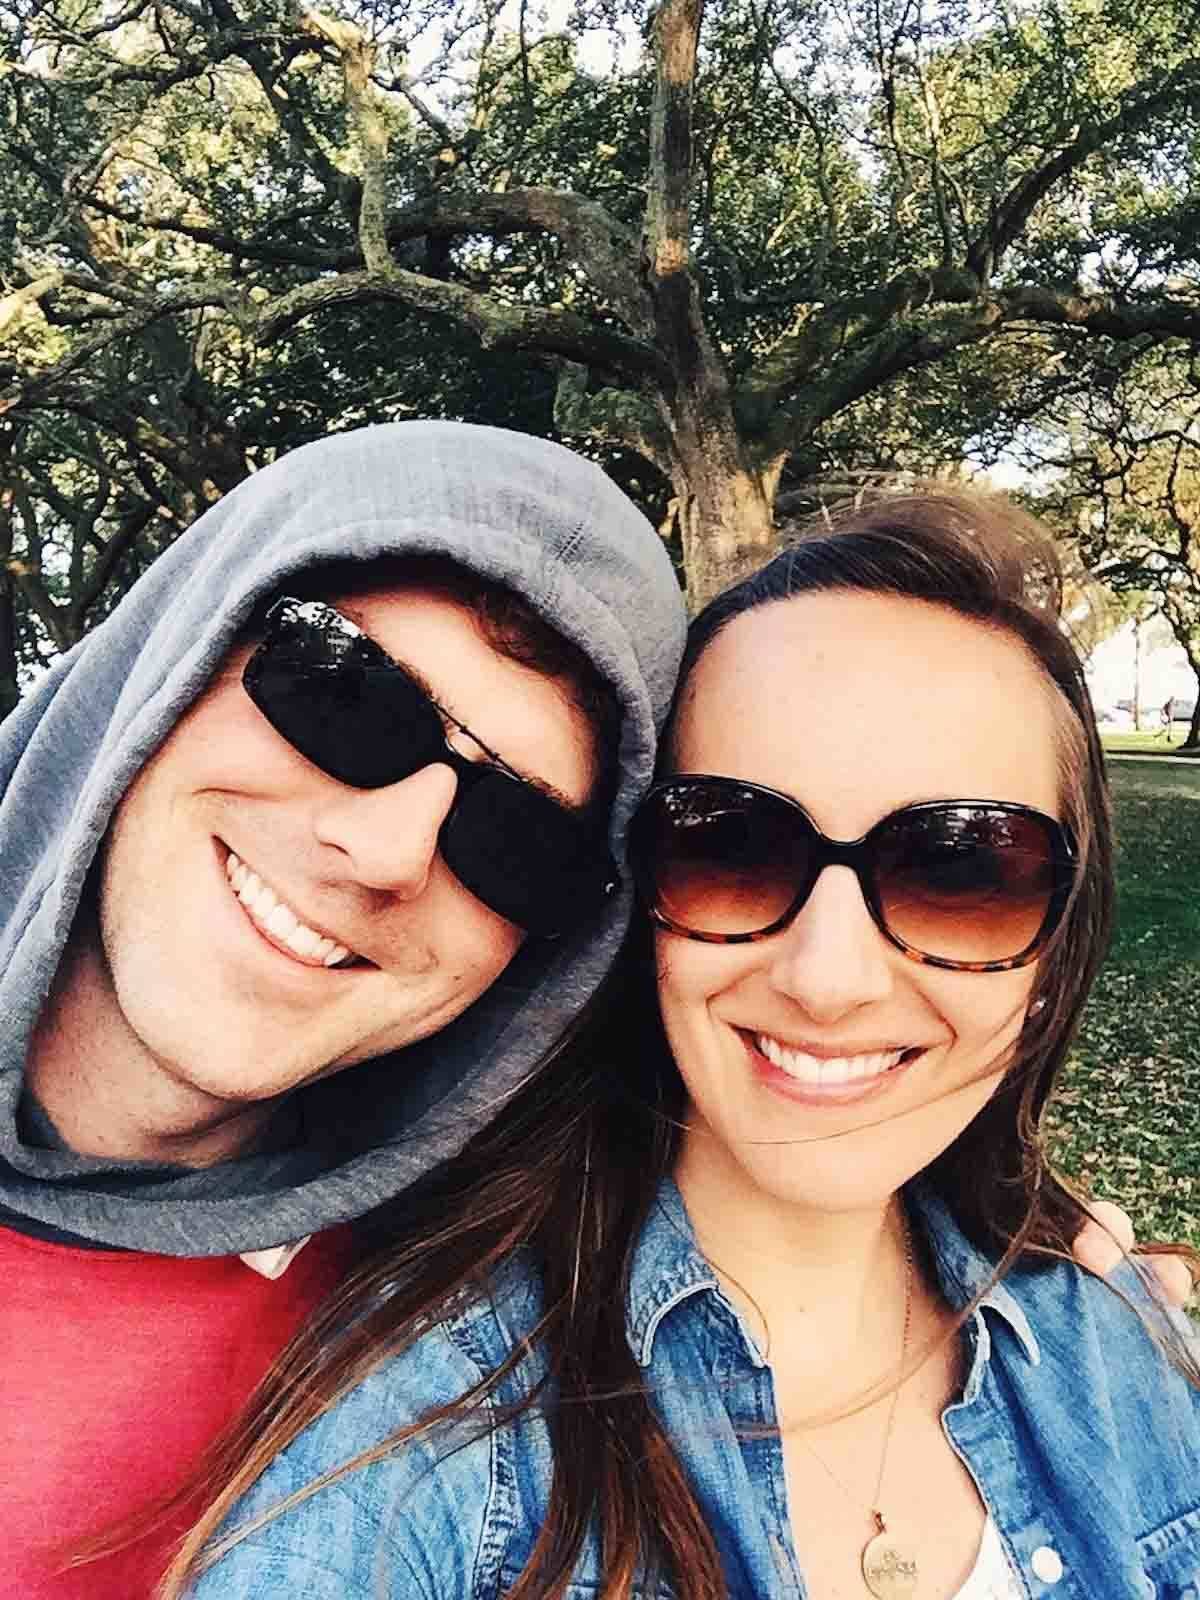 Man and woman smiling with sunglasses.